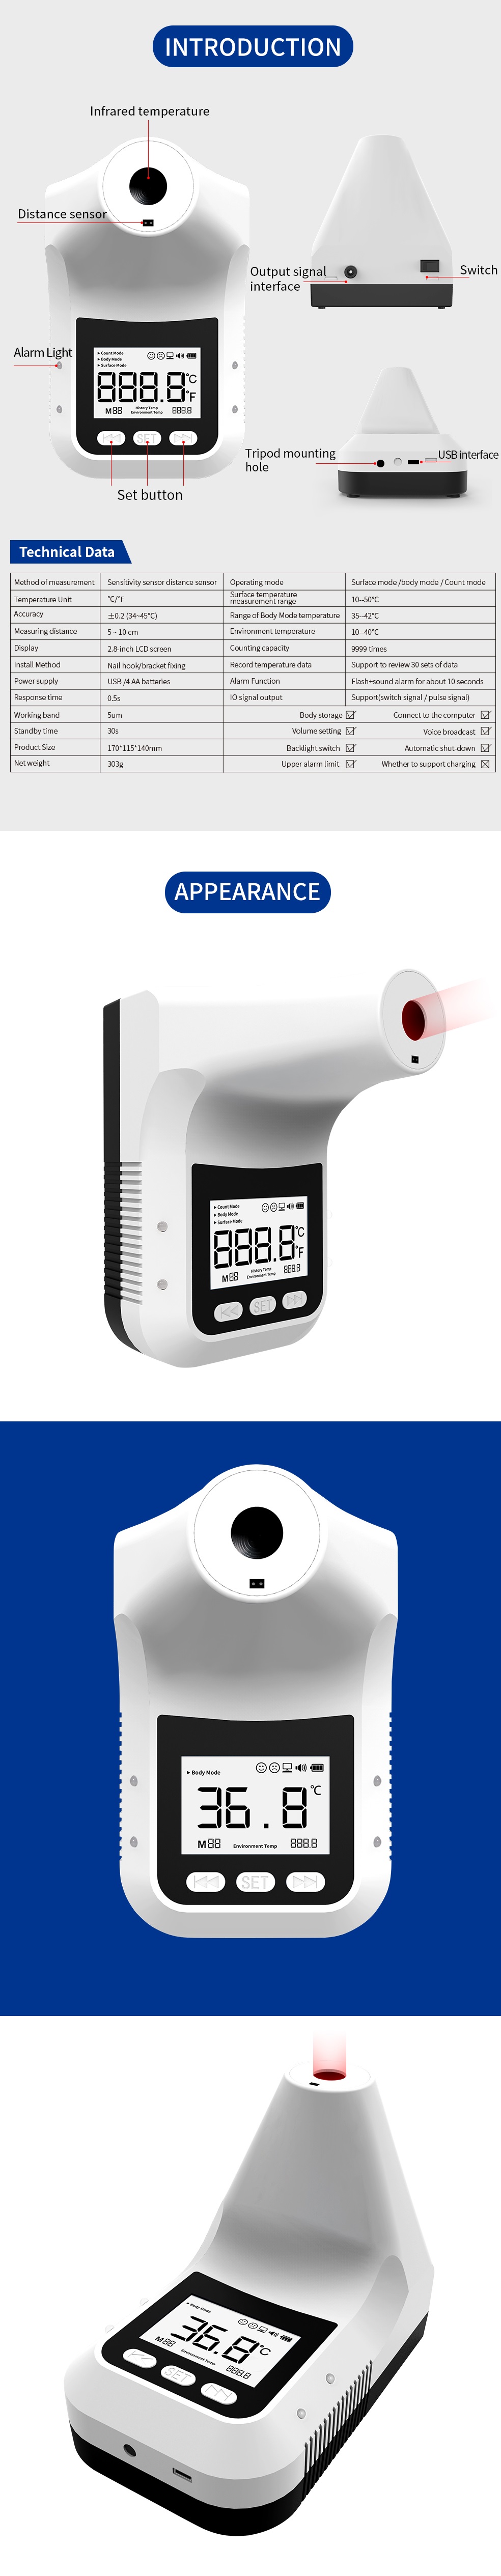 K3-Pro-Infrared-Thermometer-Digital-Non-Contact-Wall-Mounted-Fixed-Electronic-Thermometer-Forehead-W-1826491-3